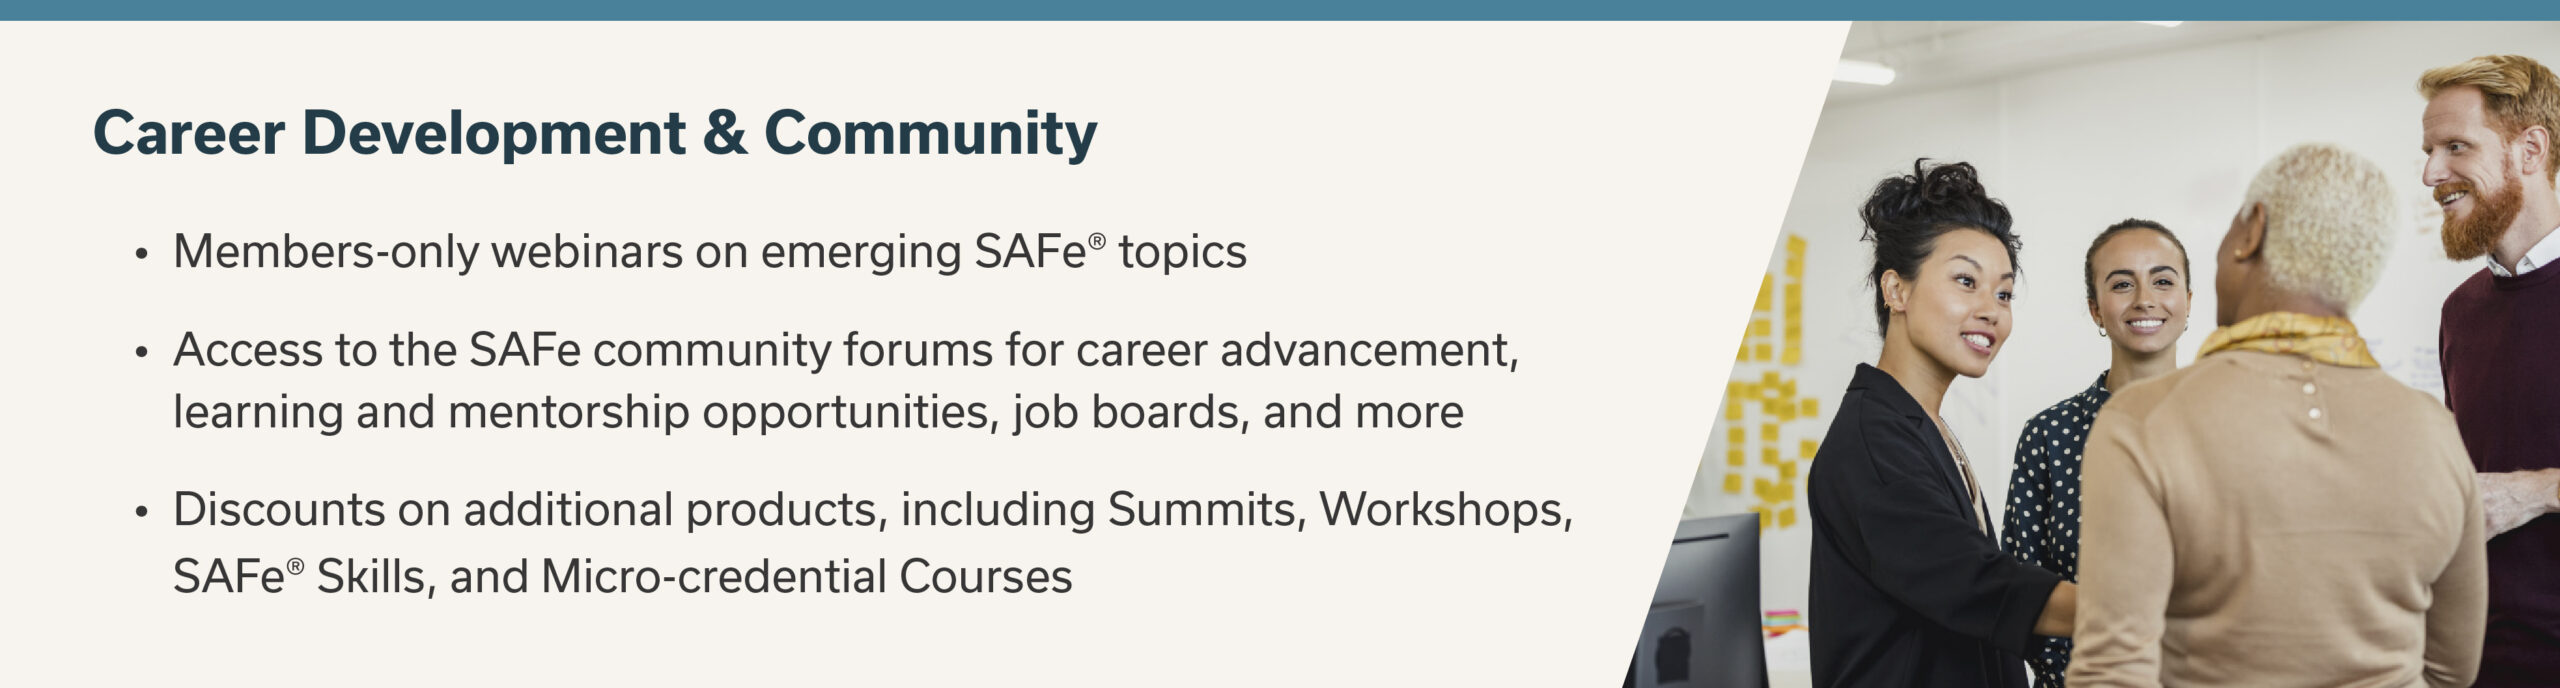 Career Development + Community
- Members-only webinars on emerging SAFe topics
- Access to the SAFe community forums for career advancement, learning and mentorship opportunities, job boards, and more
- Discounts on additional products, including Summits, workshops, SAFe Skills, and Micro-credential Courses